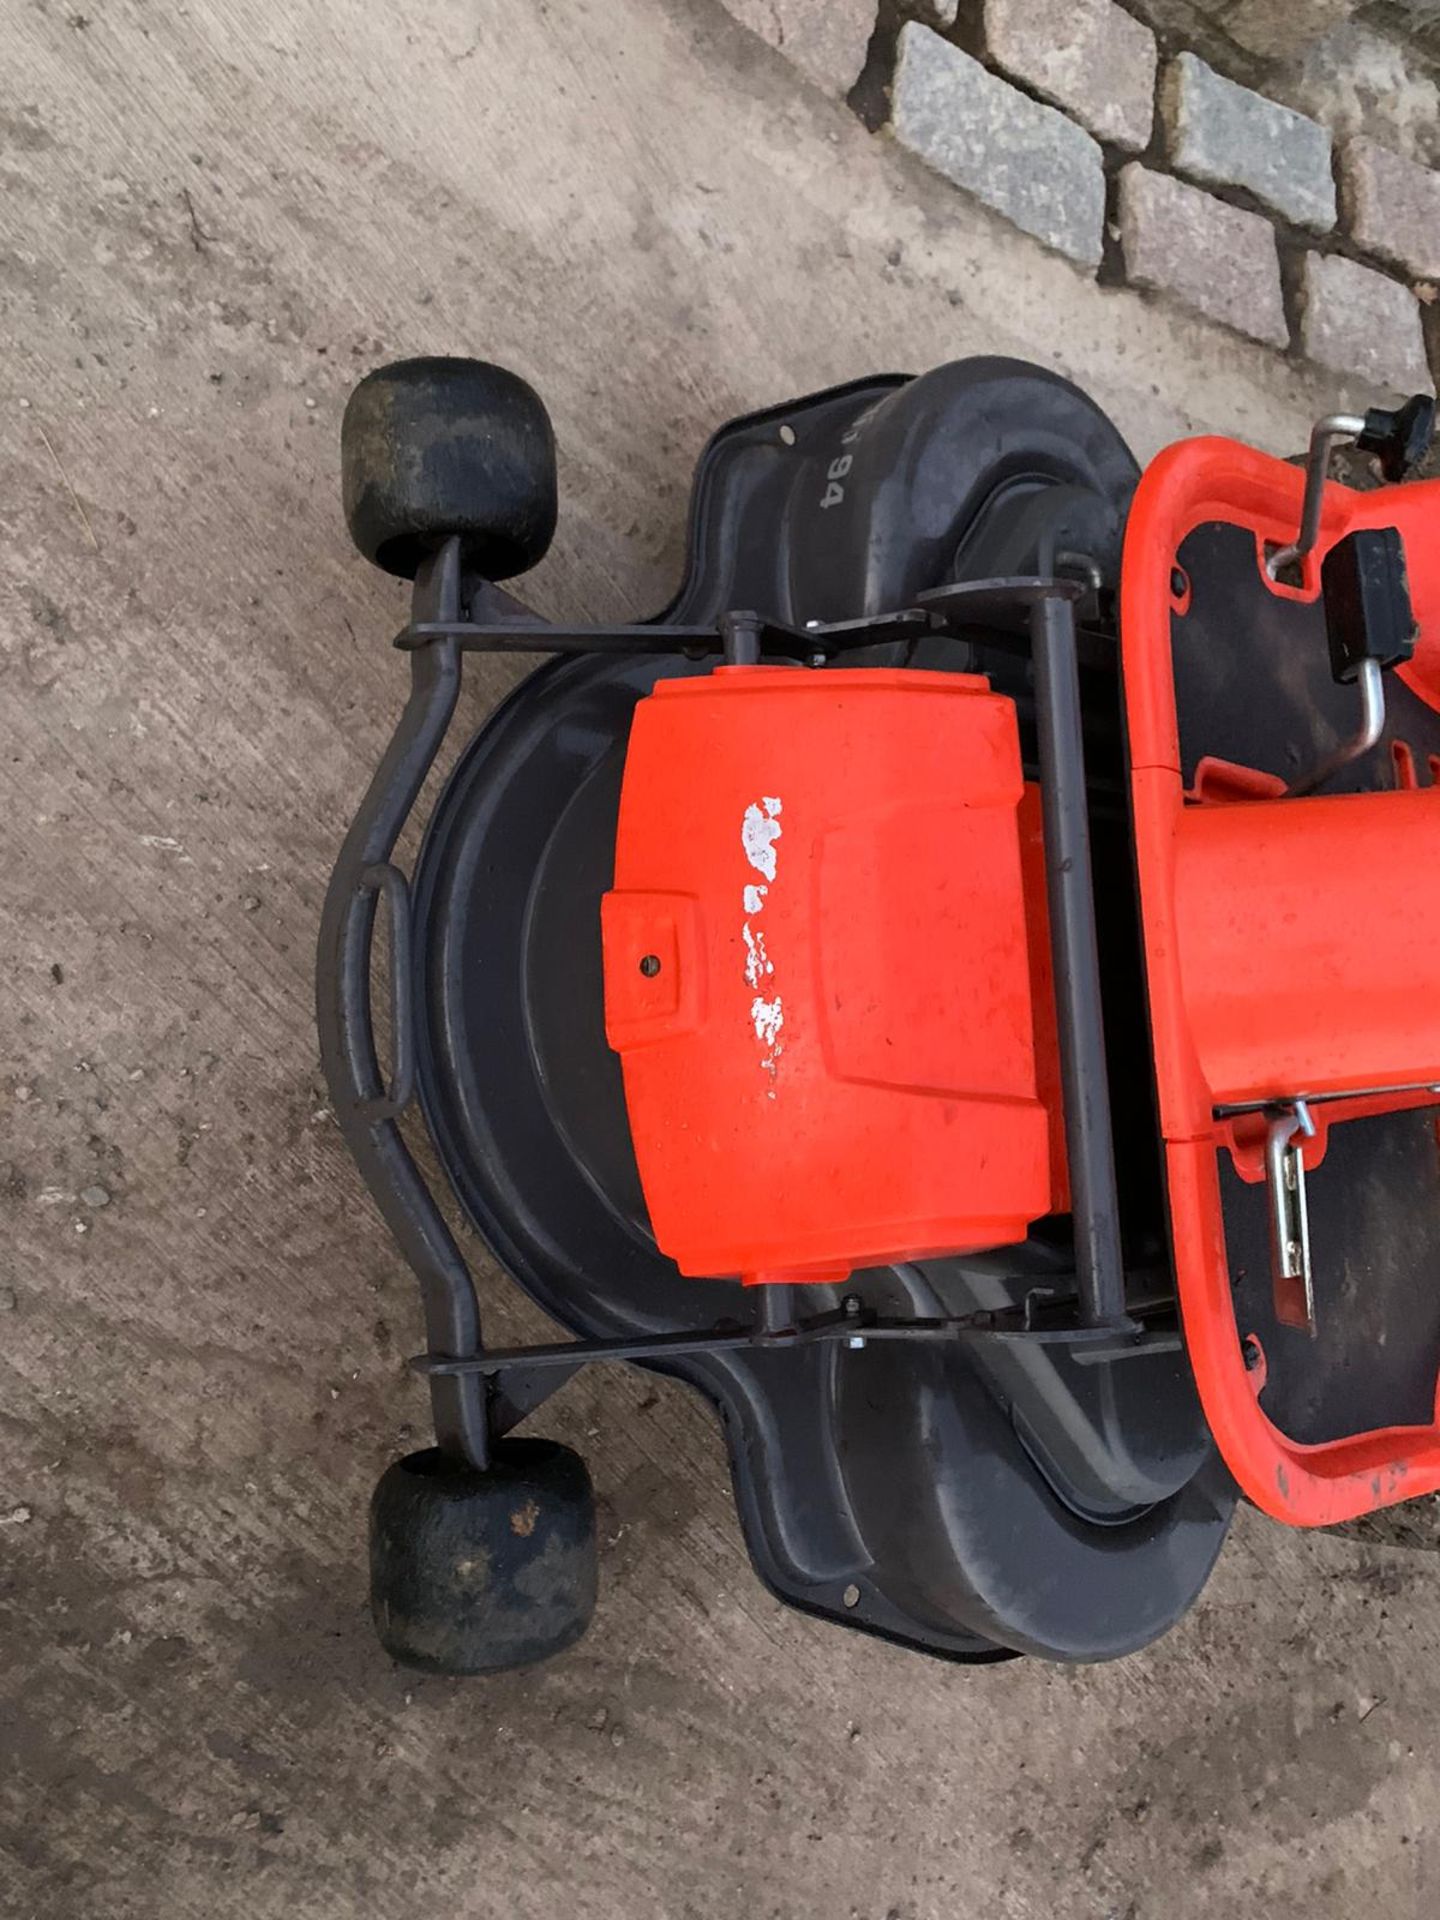 HUSQUVARNA R13C OUT FRONT RIDE ON LAWN MOWER, RUNS, DRIVES AND CUTS *NO VAT* - Image 3 of 5